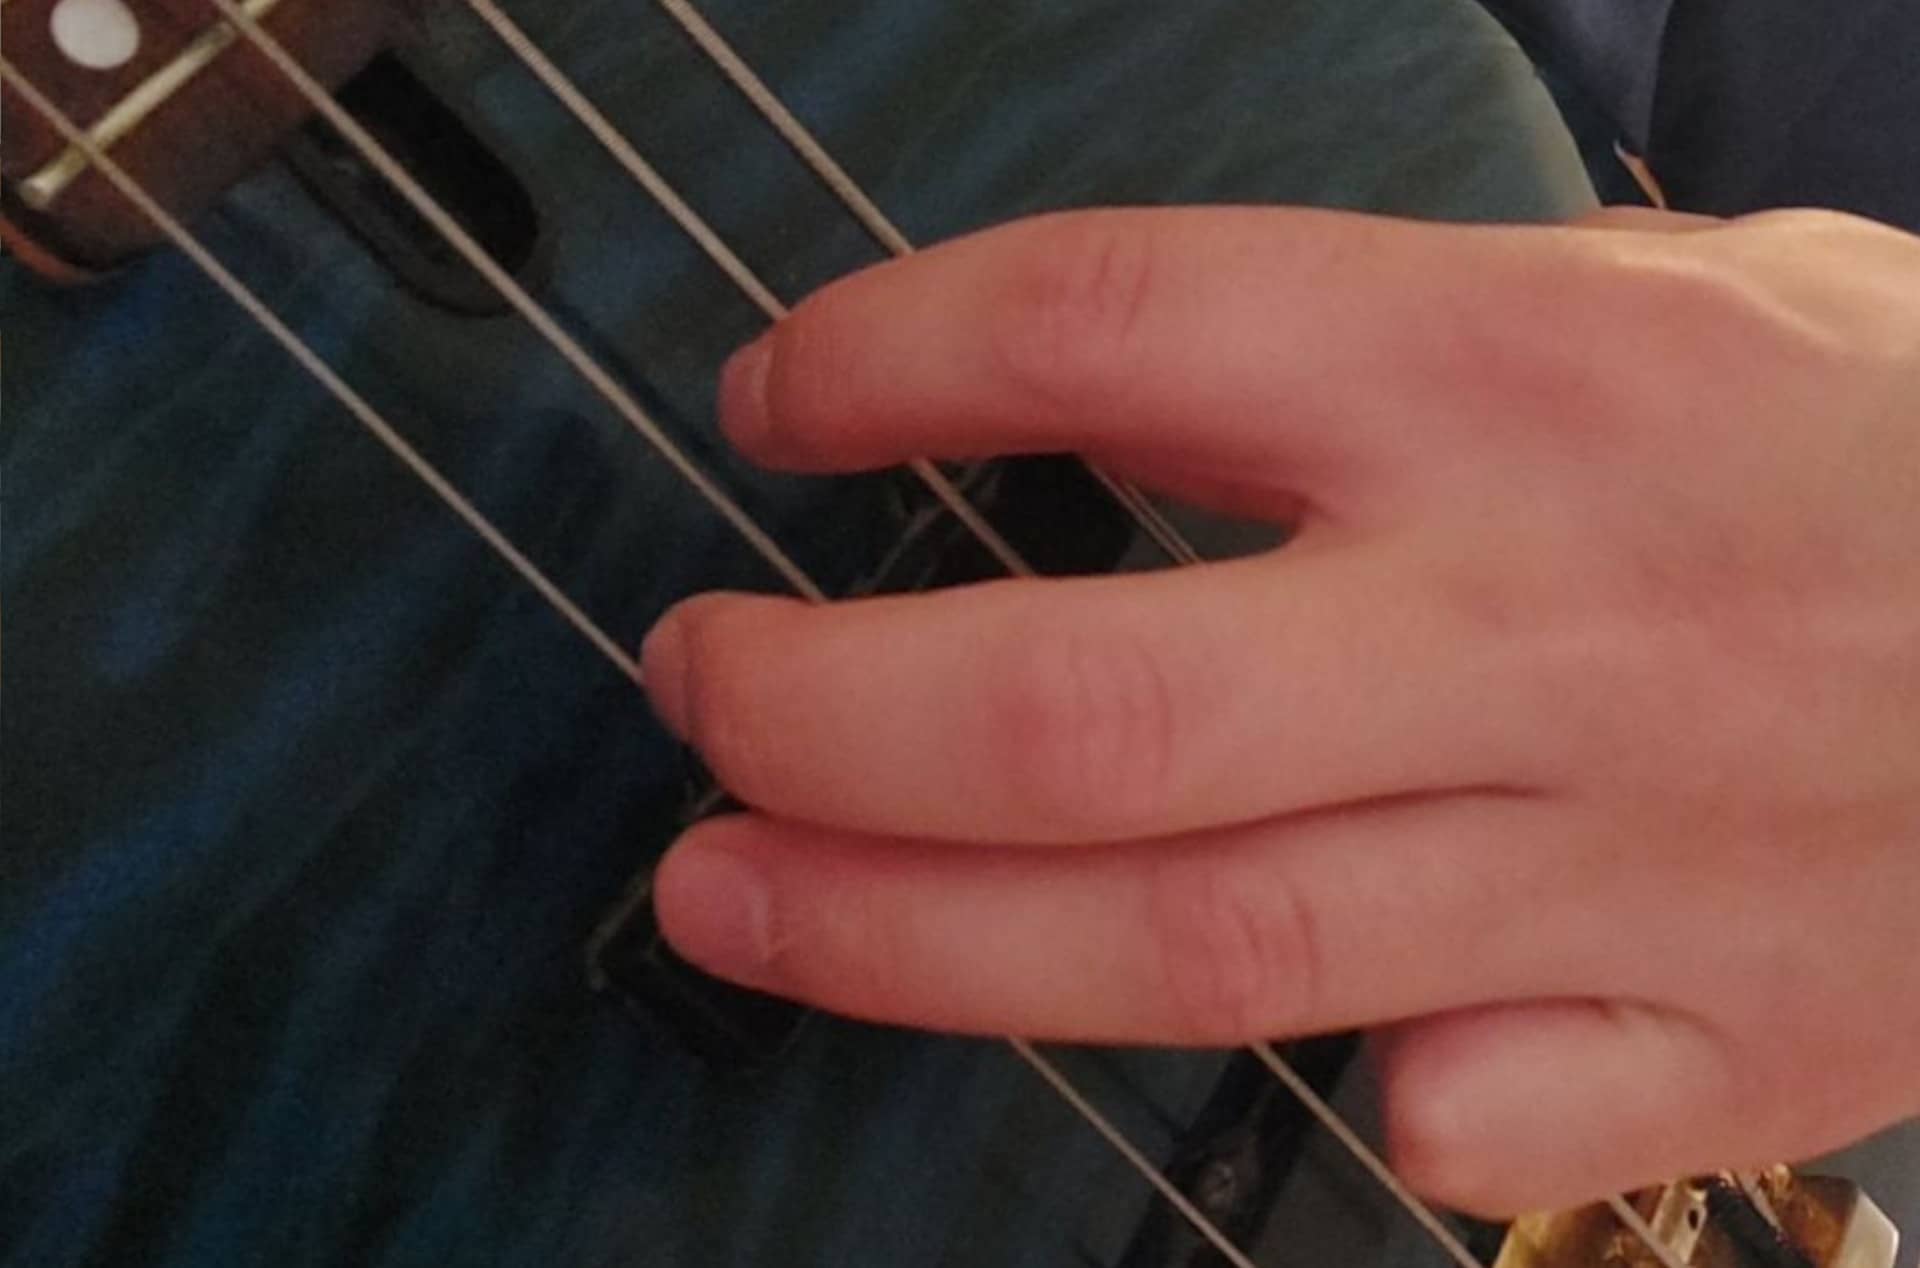 bass being strummed with fingers